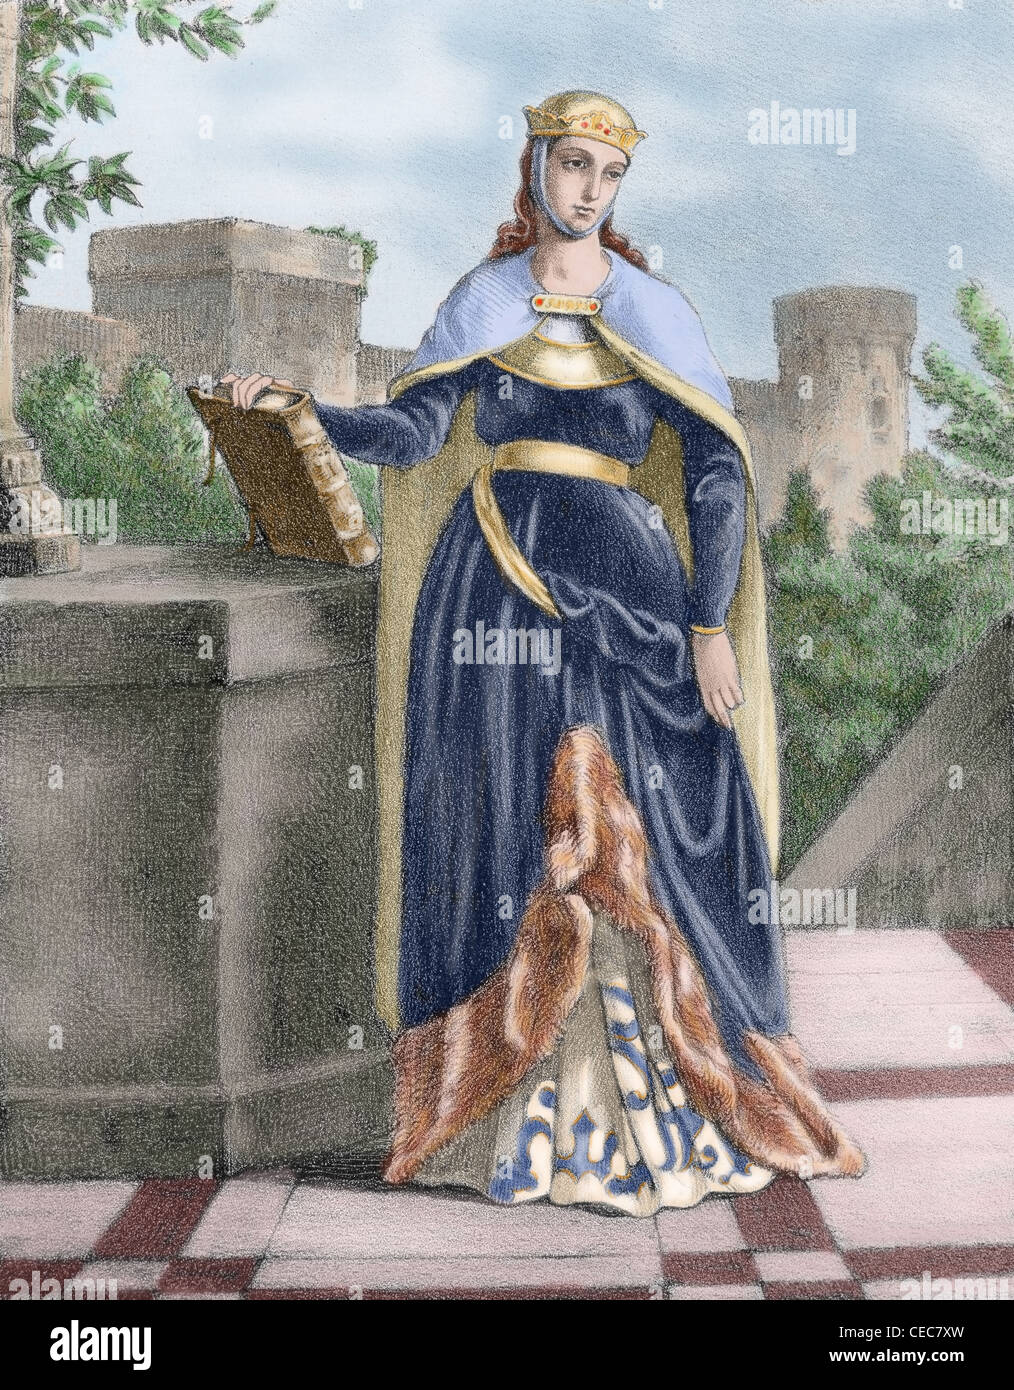 Berengaria (1180-1246). Queen regnant of Castile in 1217 and Queen consort of León from 1197 to 1204. Colored engraving. Stock Photo